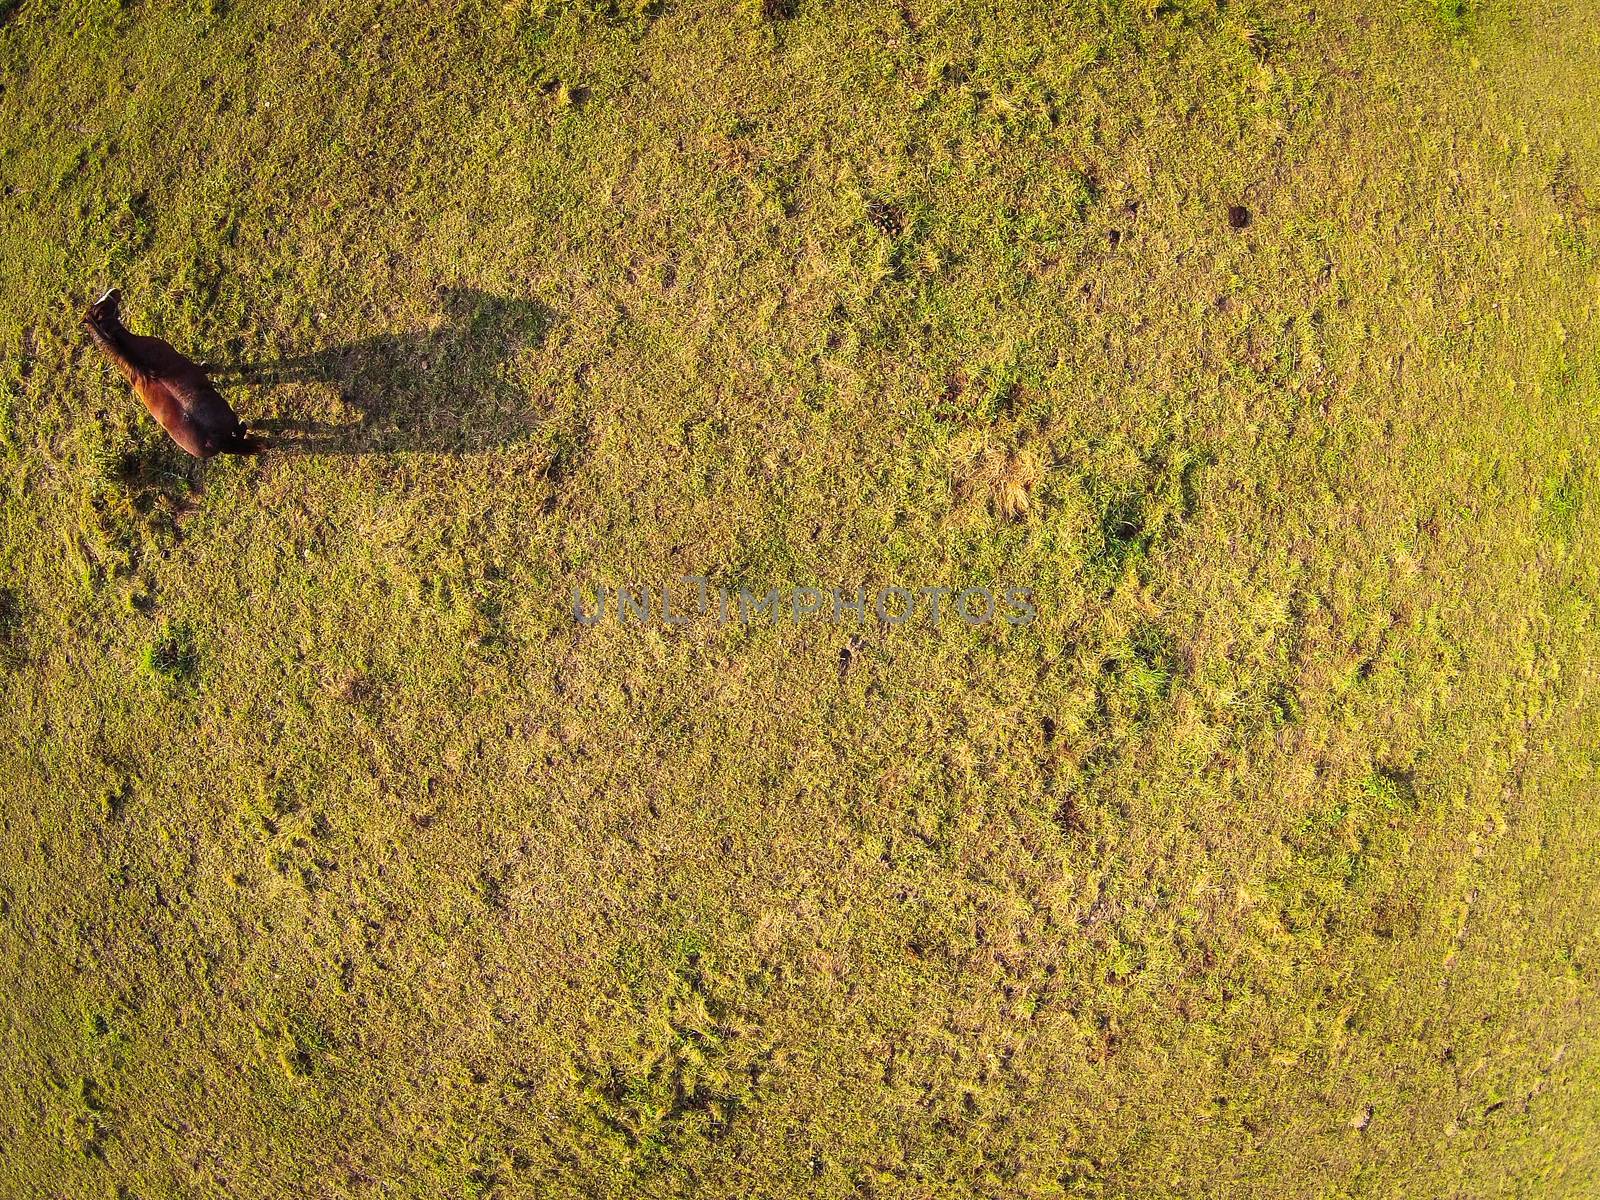 Aerial view over a pasture with a horse casting a shadow